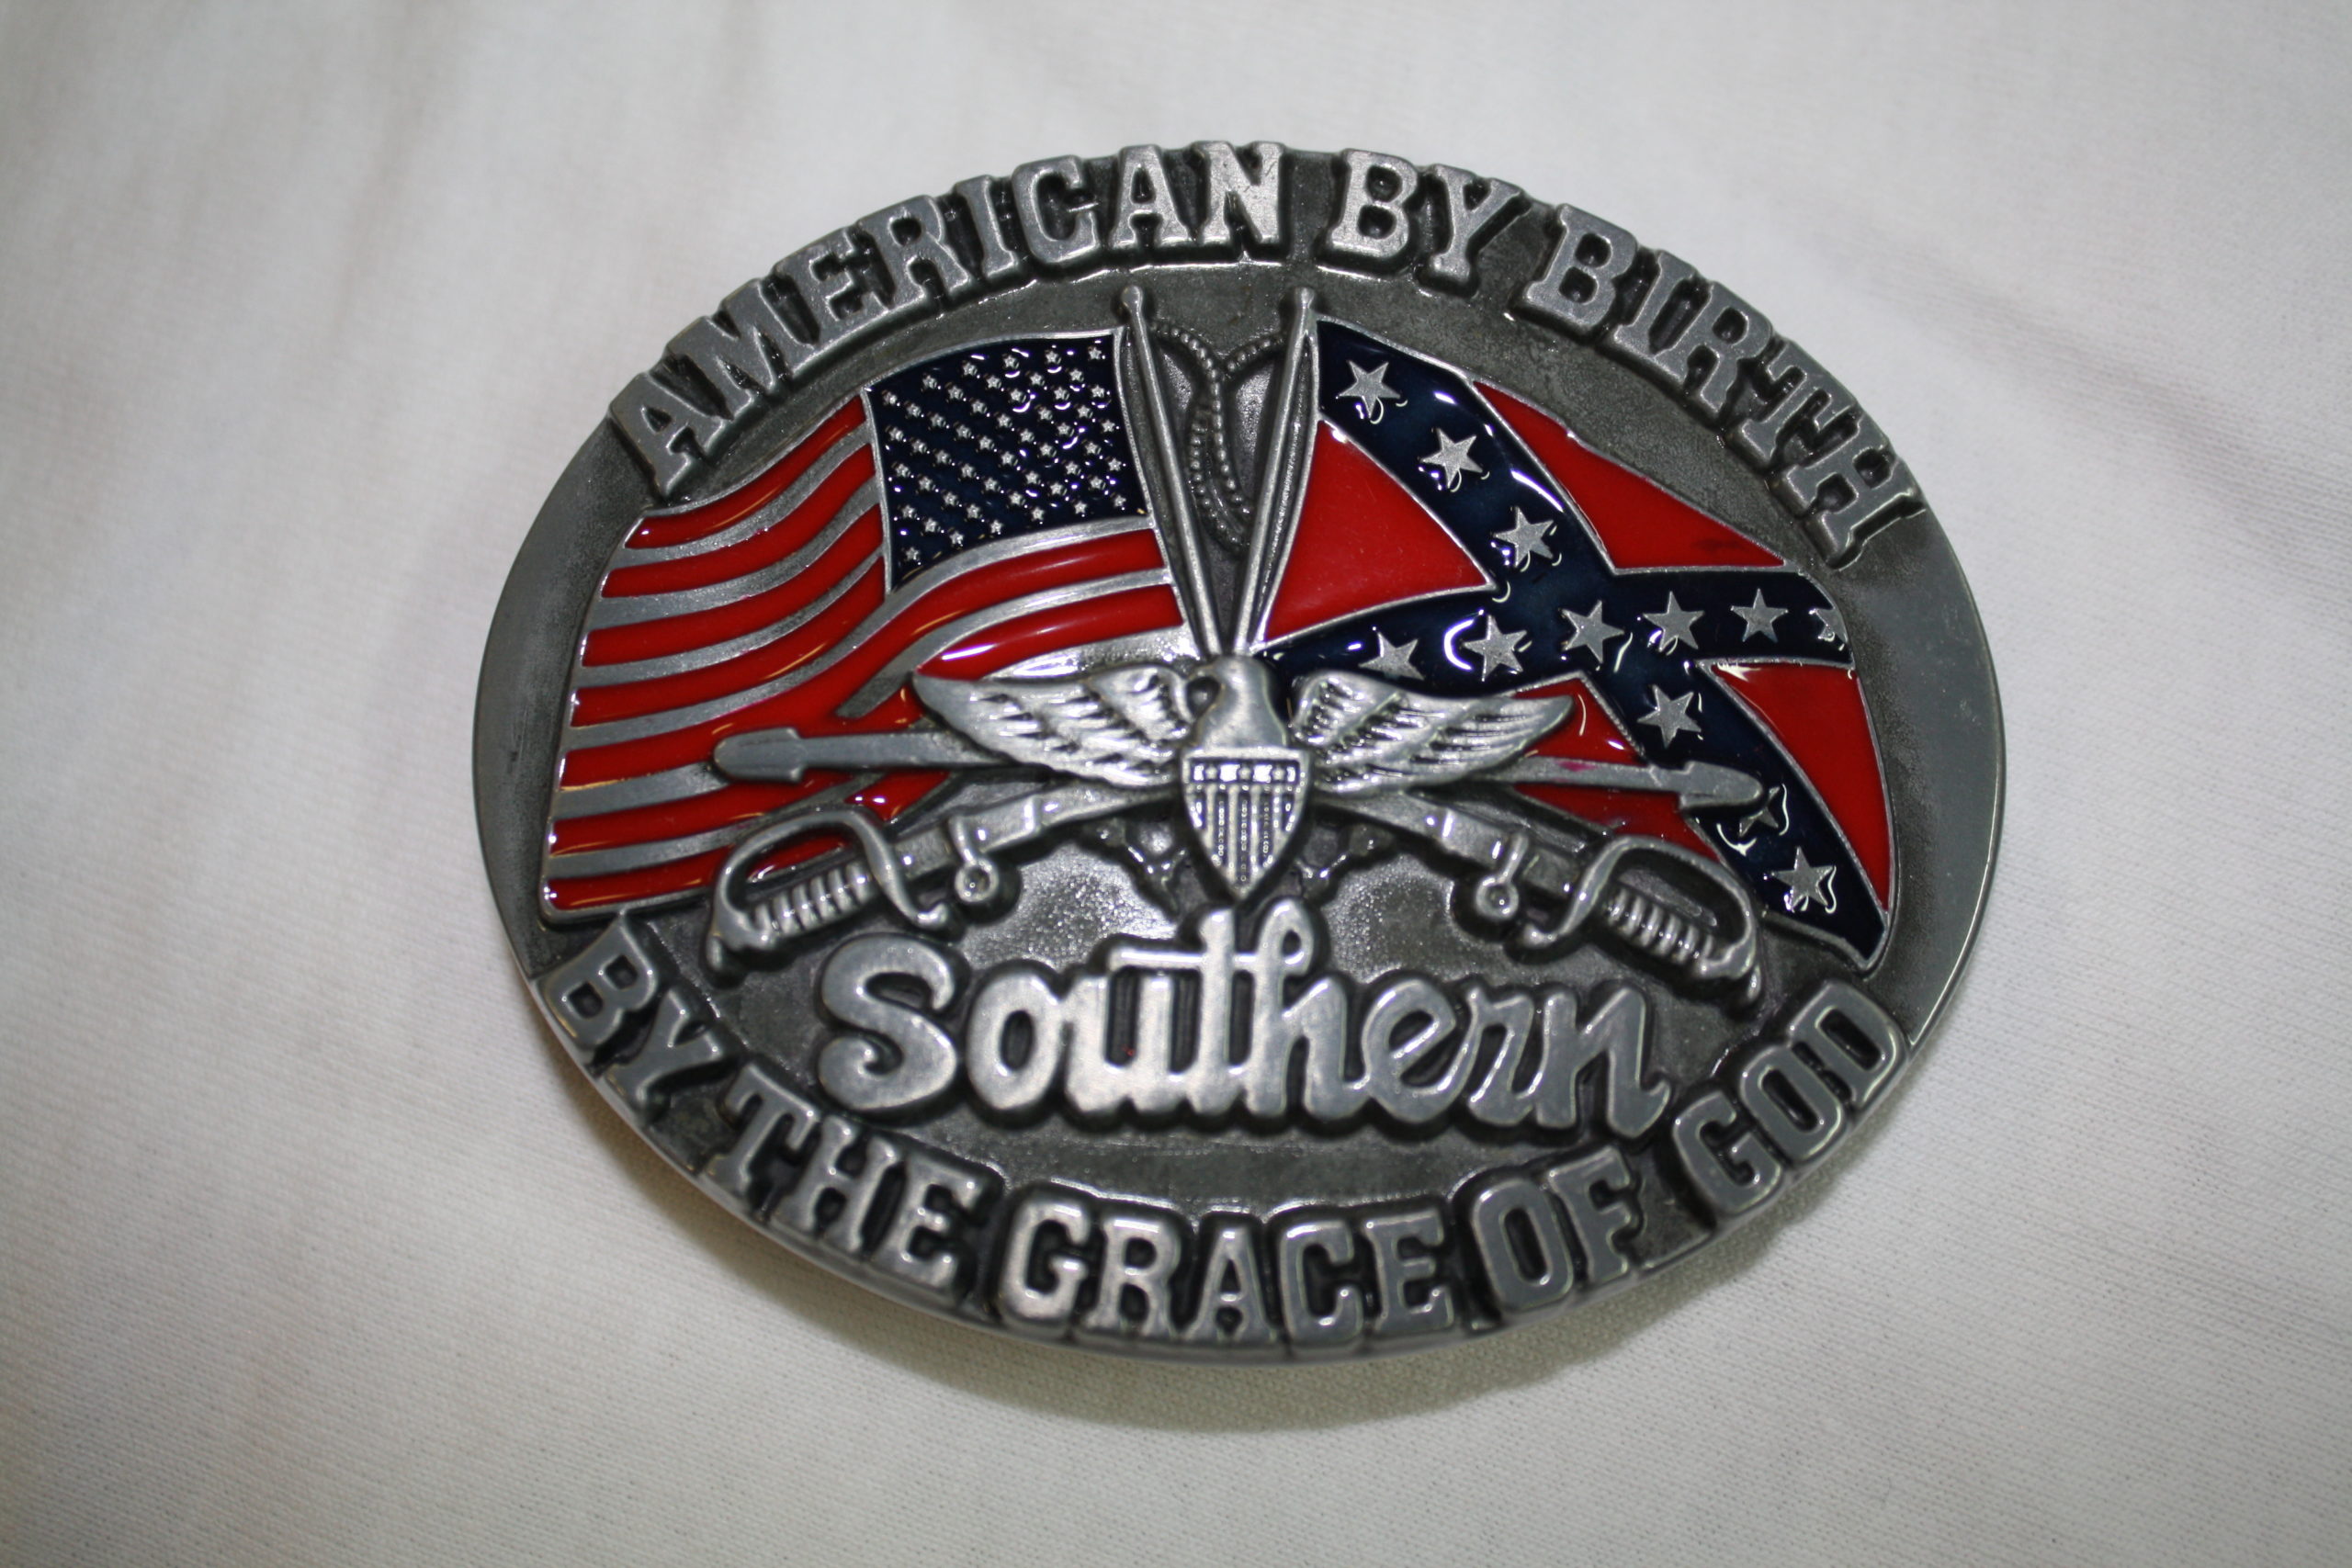 American By Birth / Southern By the Grace of God Belt Buckle